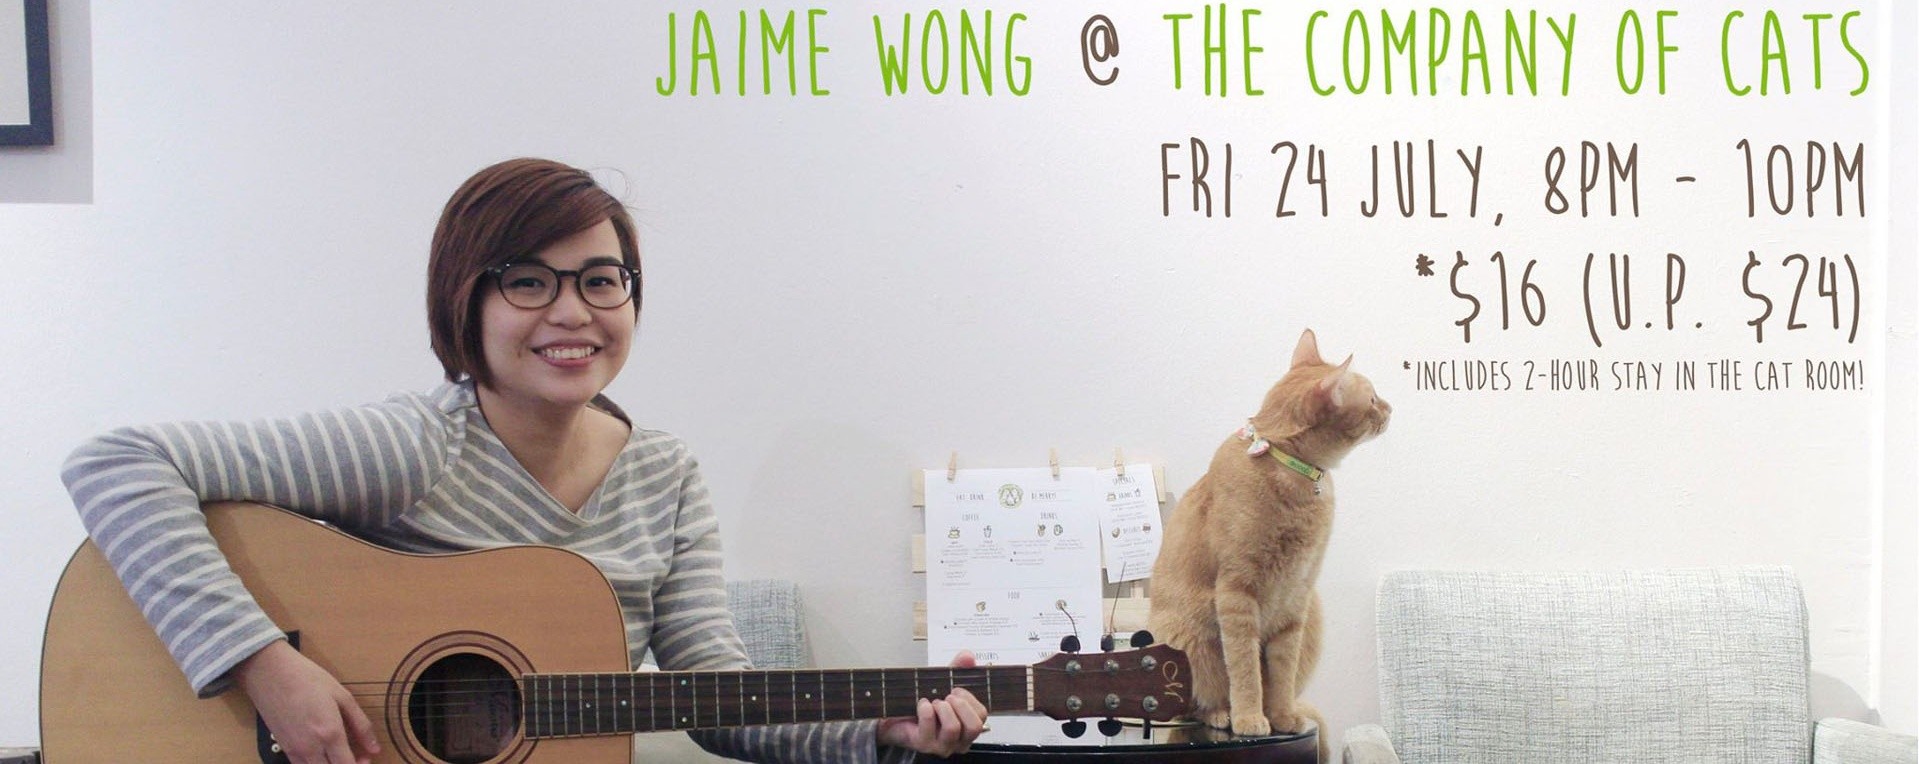 Jaime Wong @ The Company of Cats 